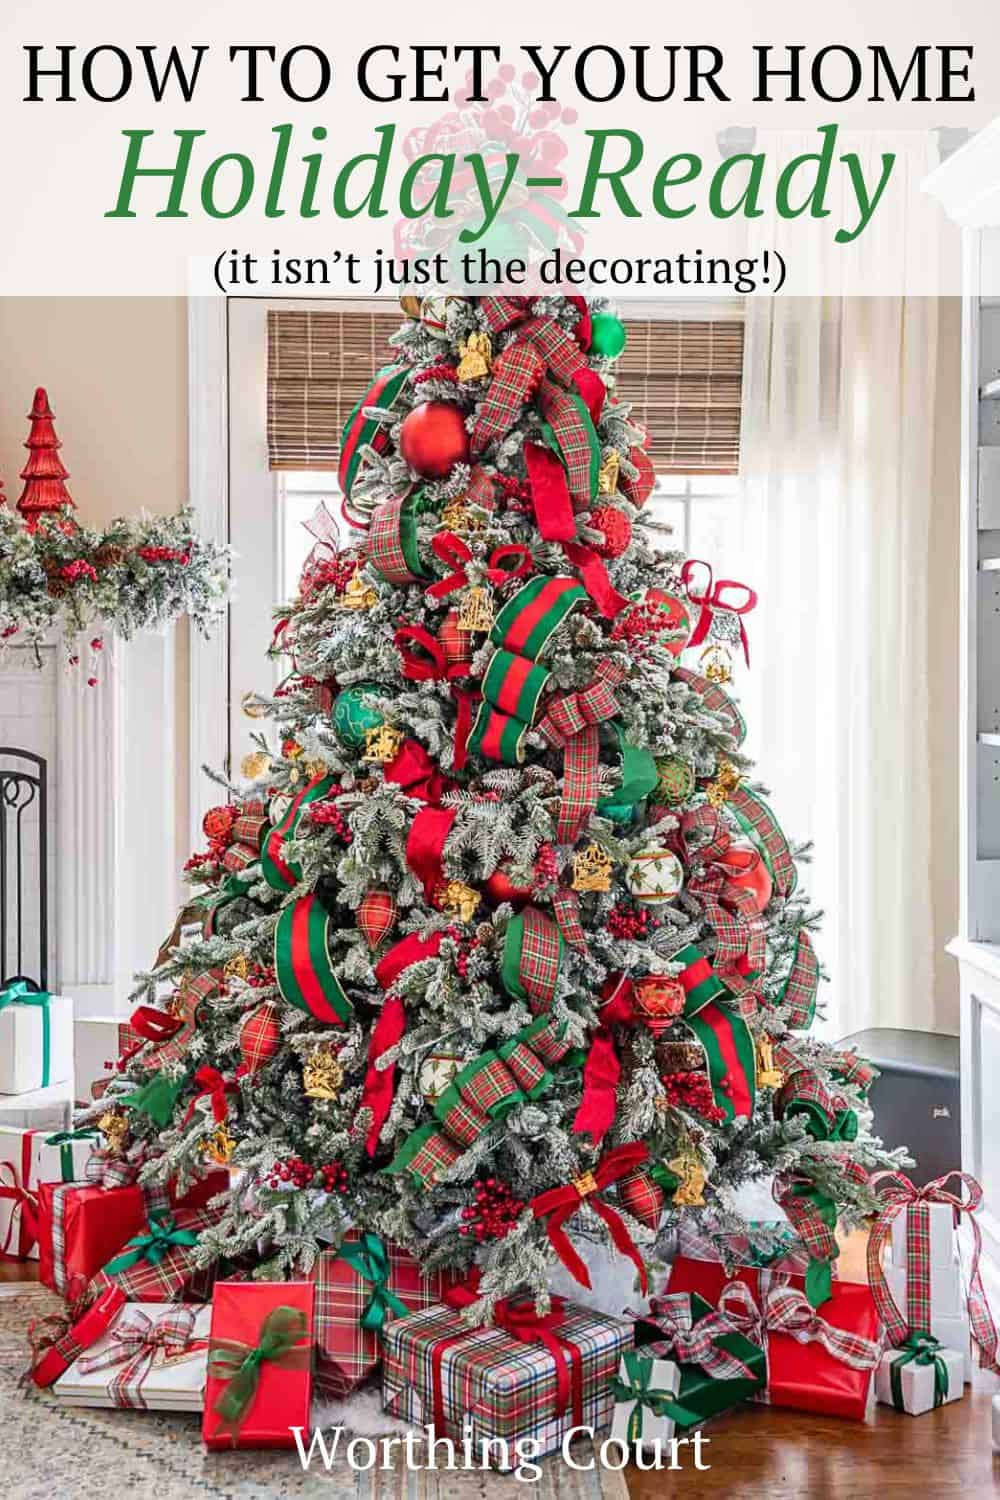 Pinterest image for how to get your home ready for the holidays